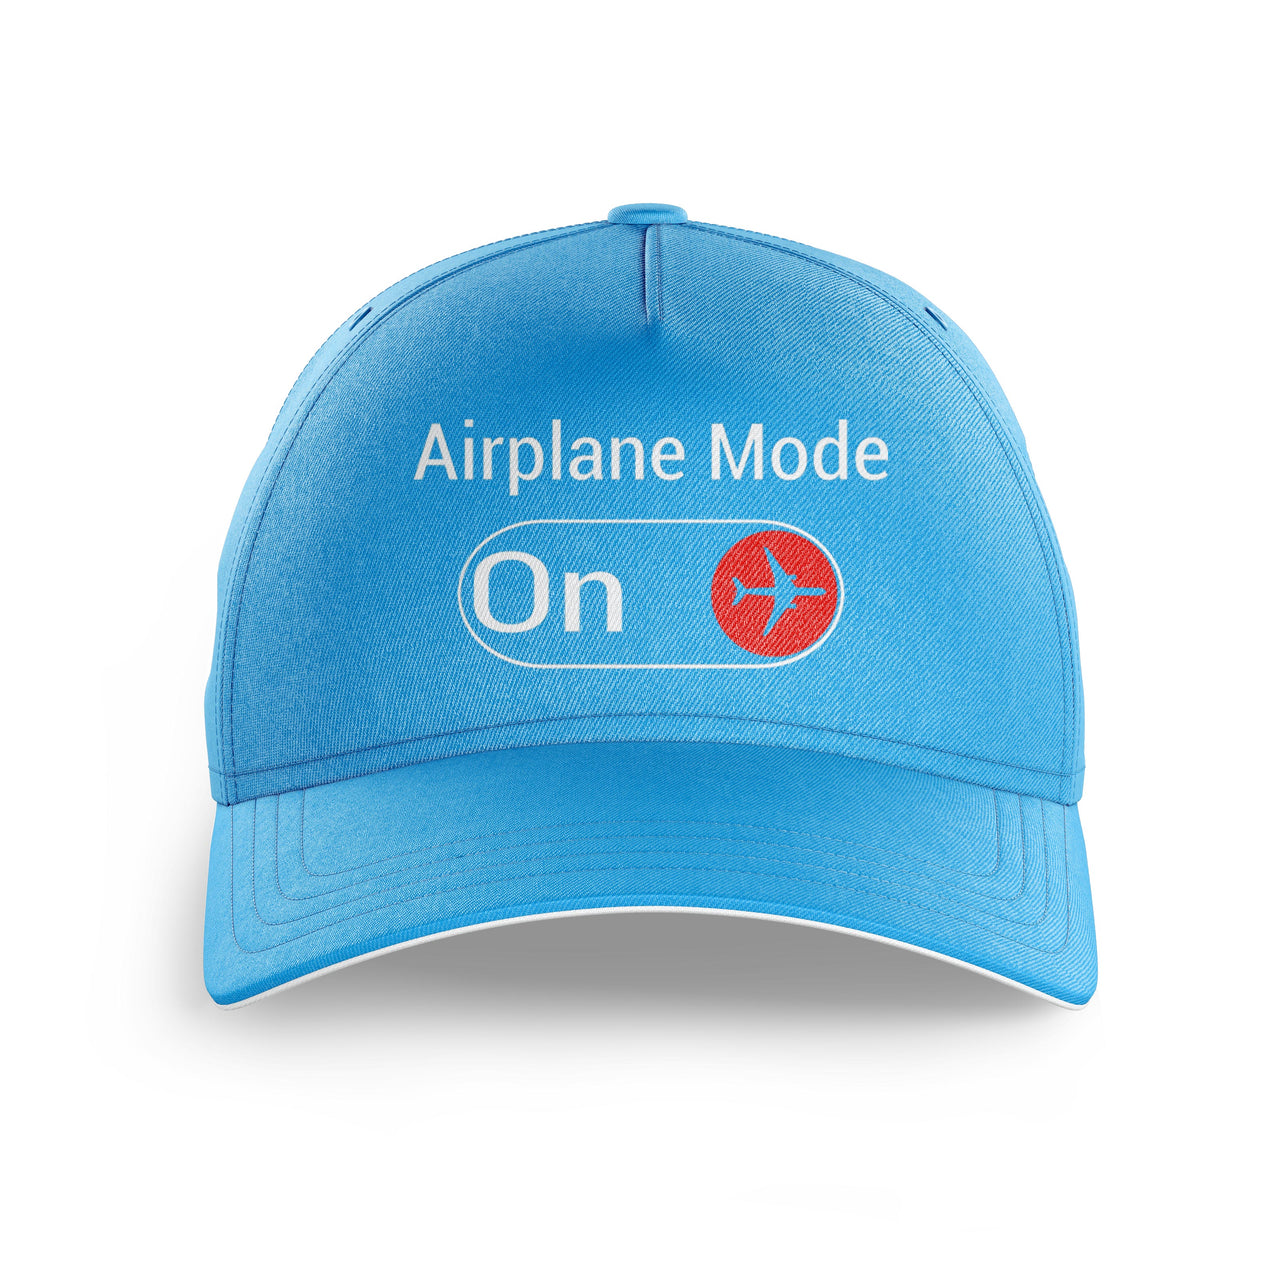 Airplane Mode On Printed Hats